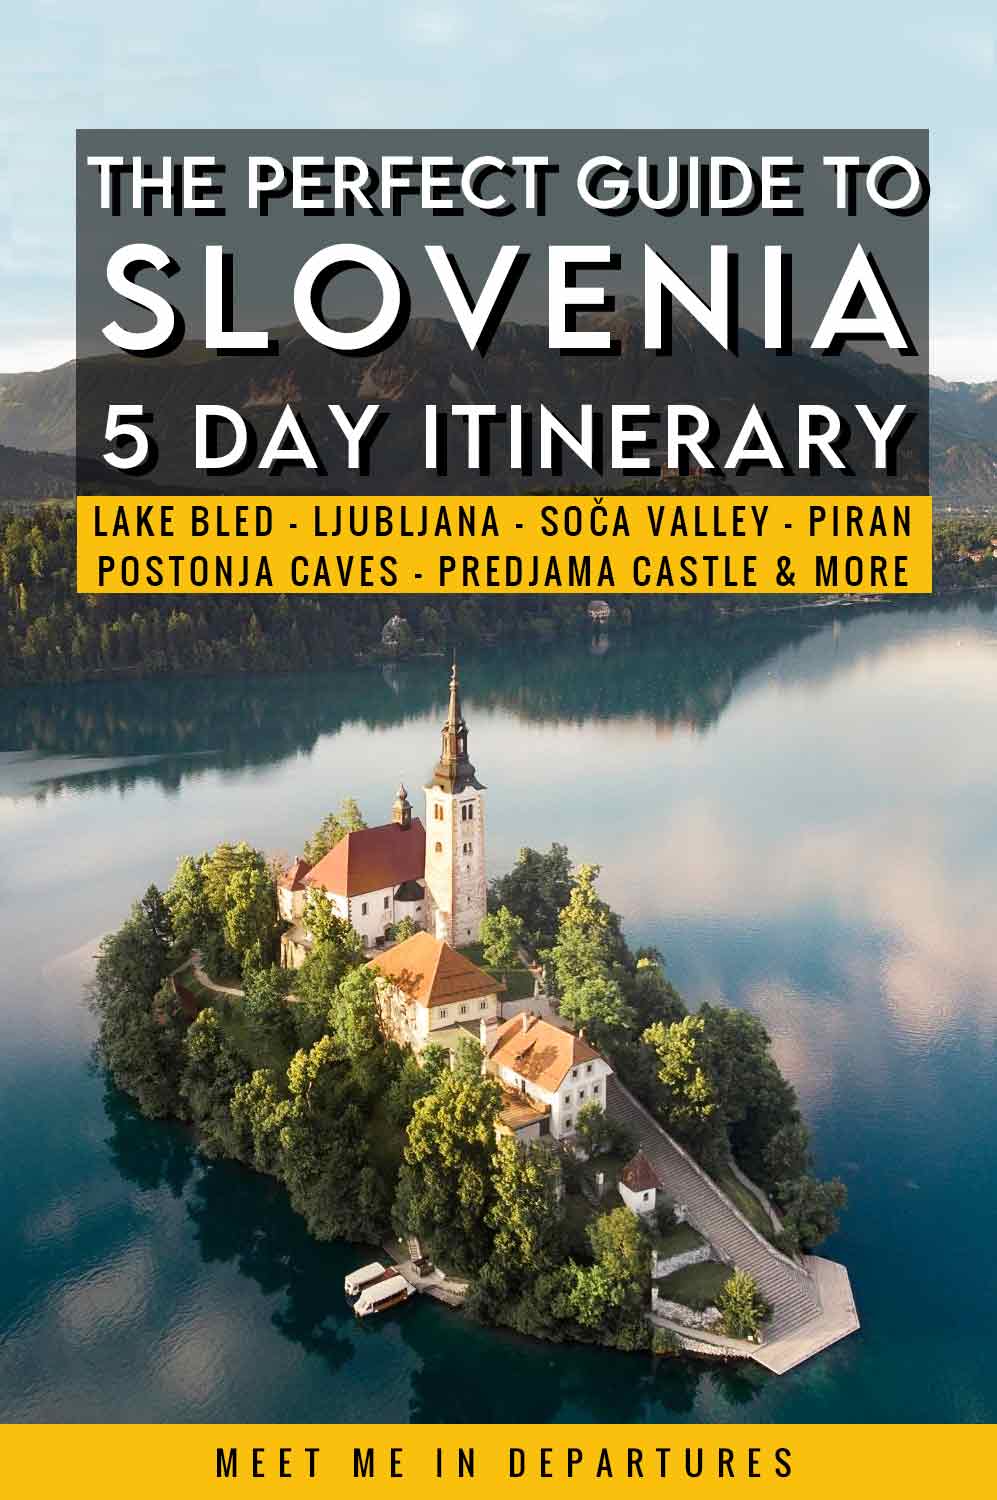 The Best 5 Days in Slovenia Itinerary - Slovenia Road Trip 5 Days Guide 15